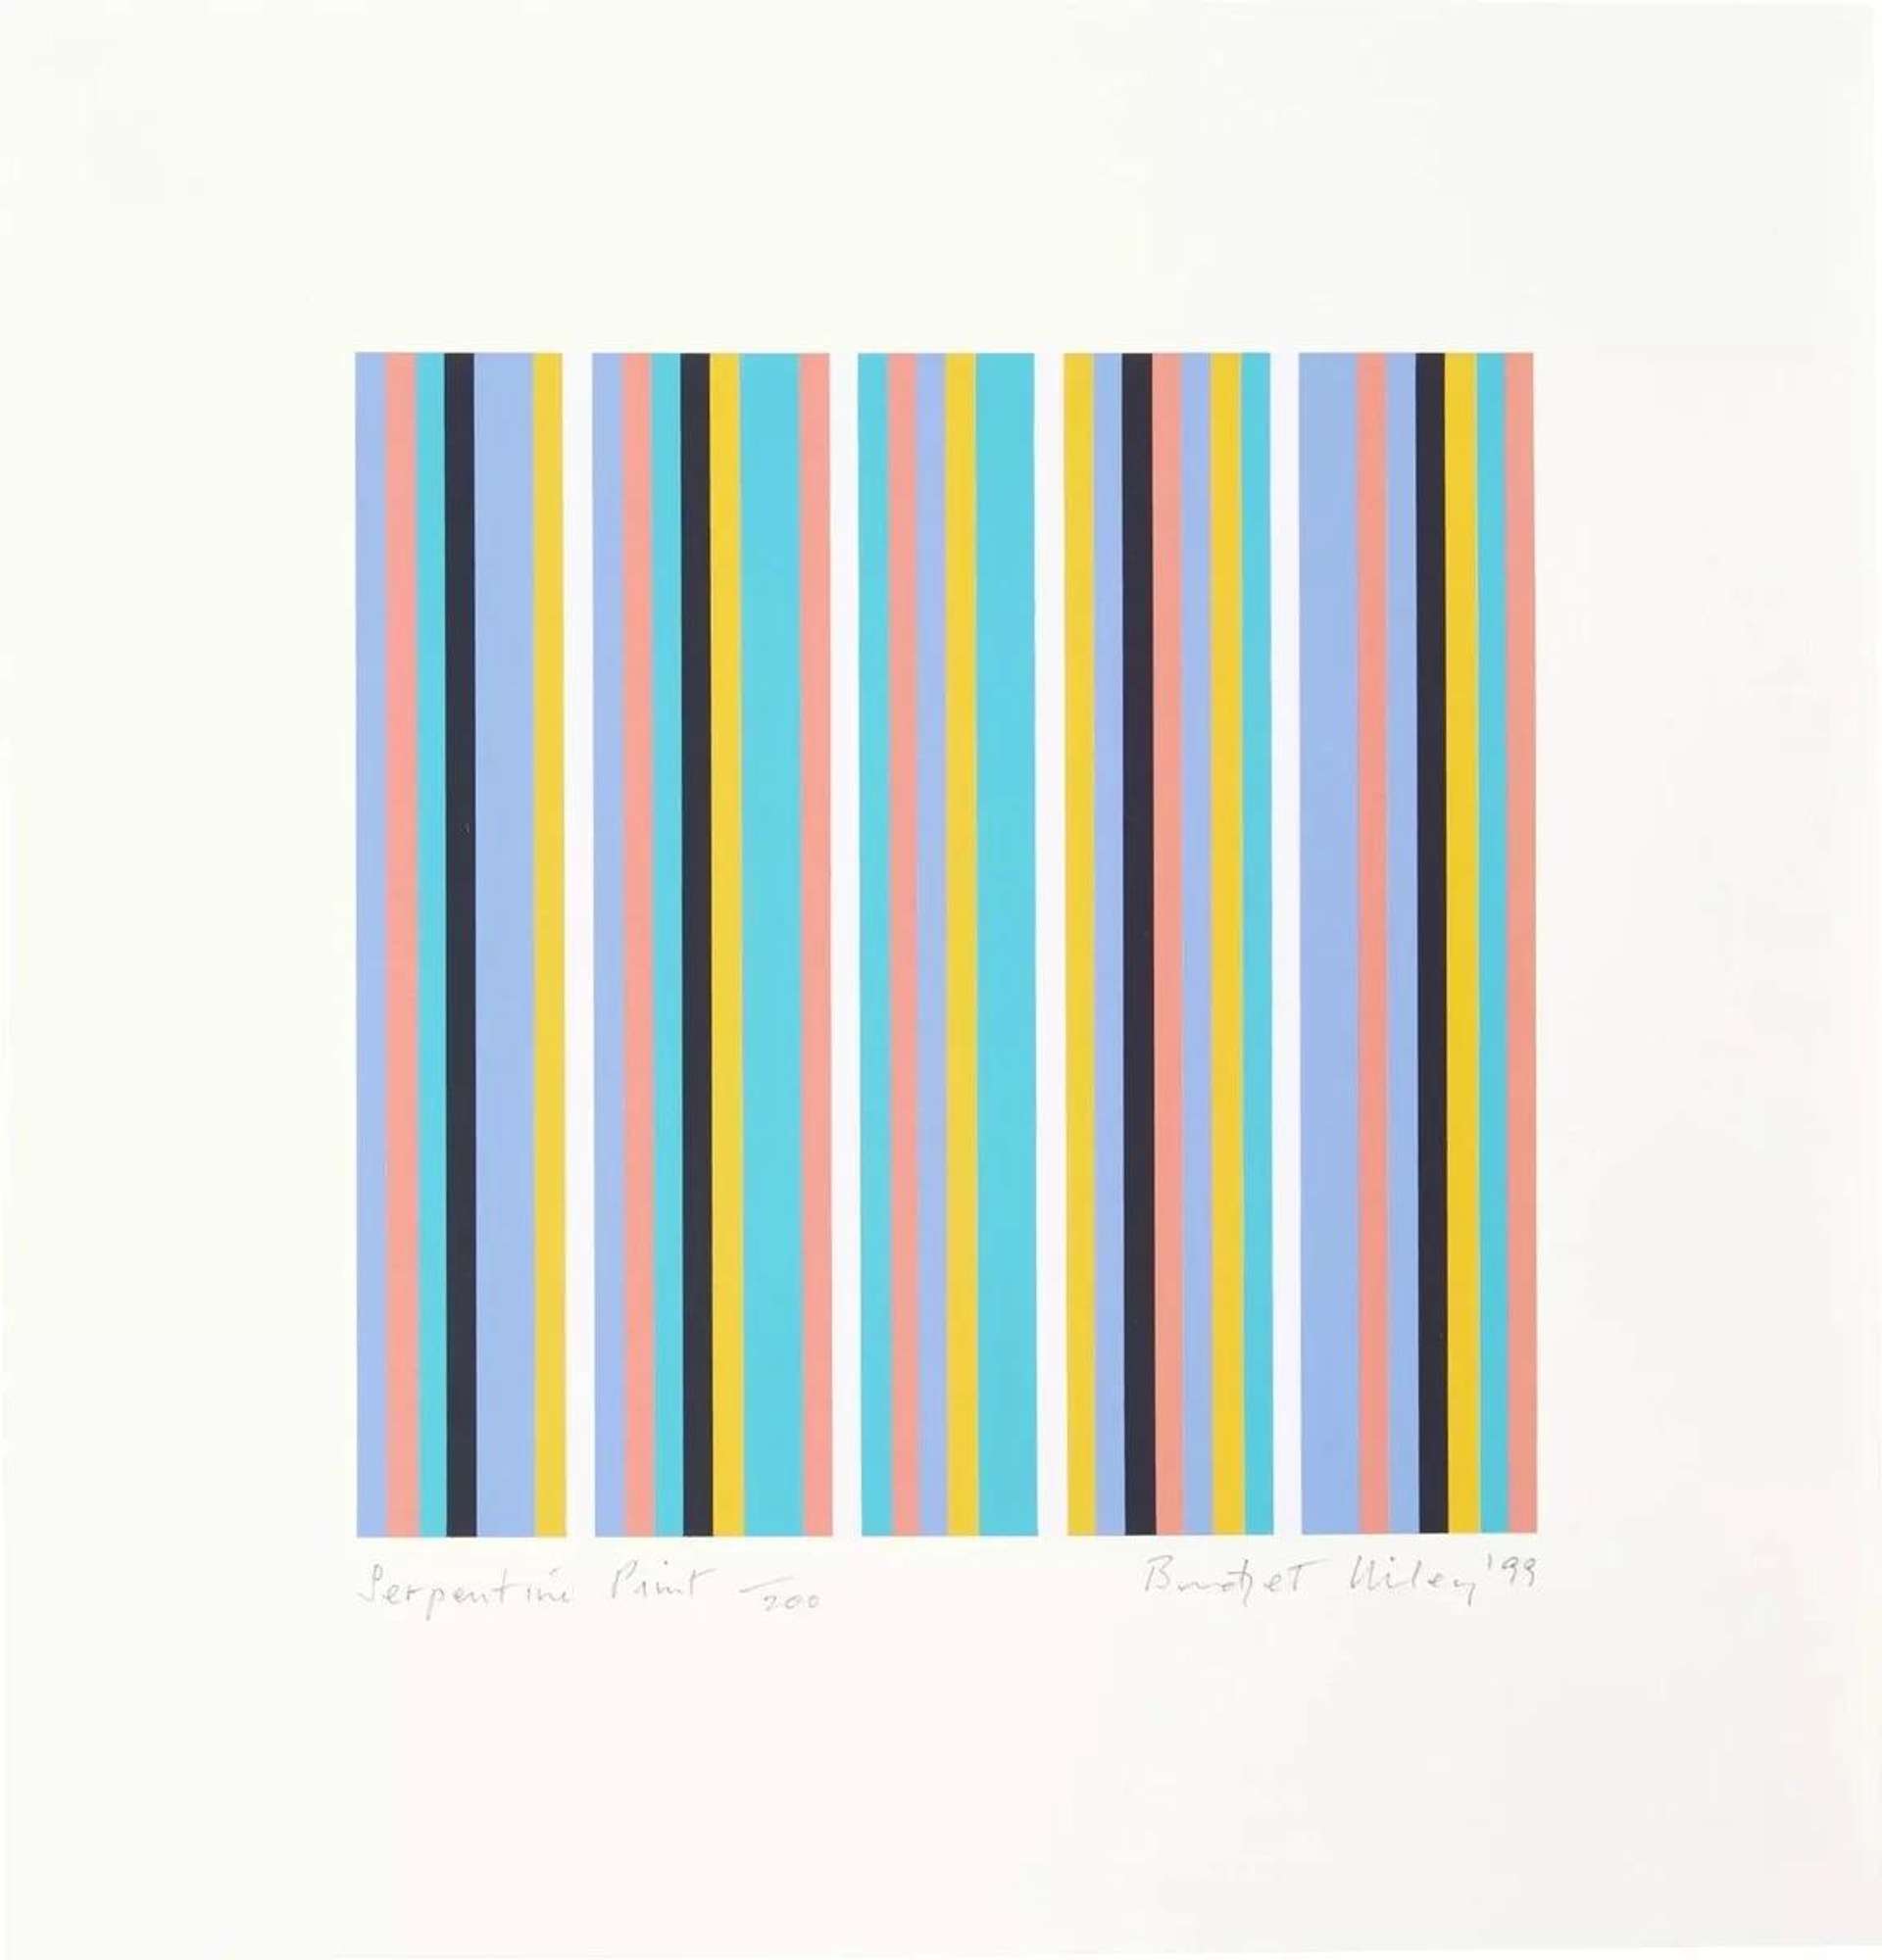 A square of colourful stripes on a white background, signed by artist Bridget Riley